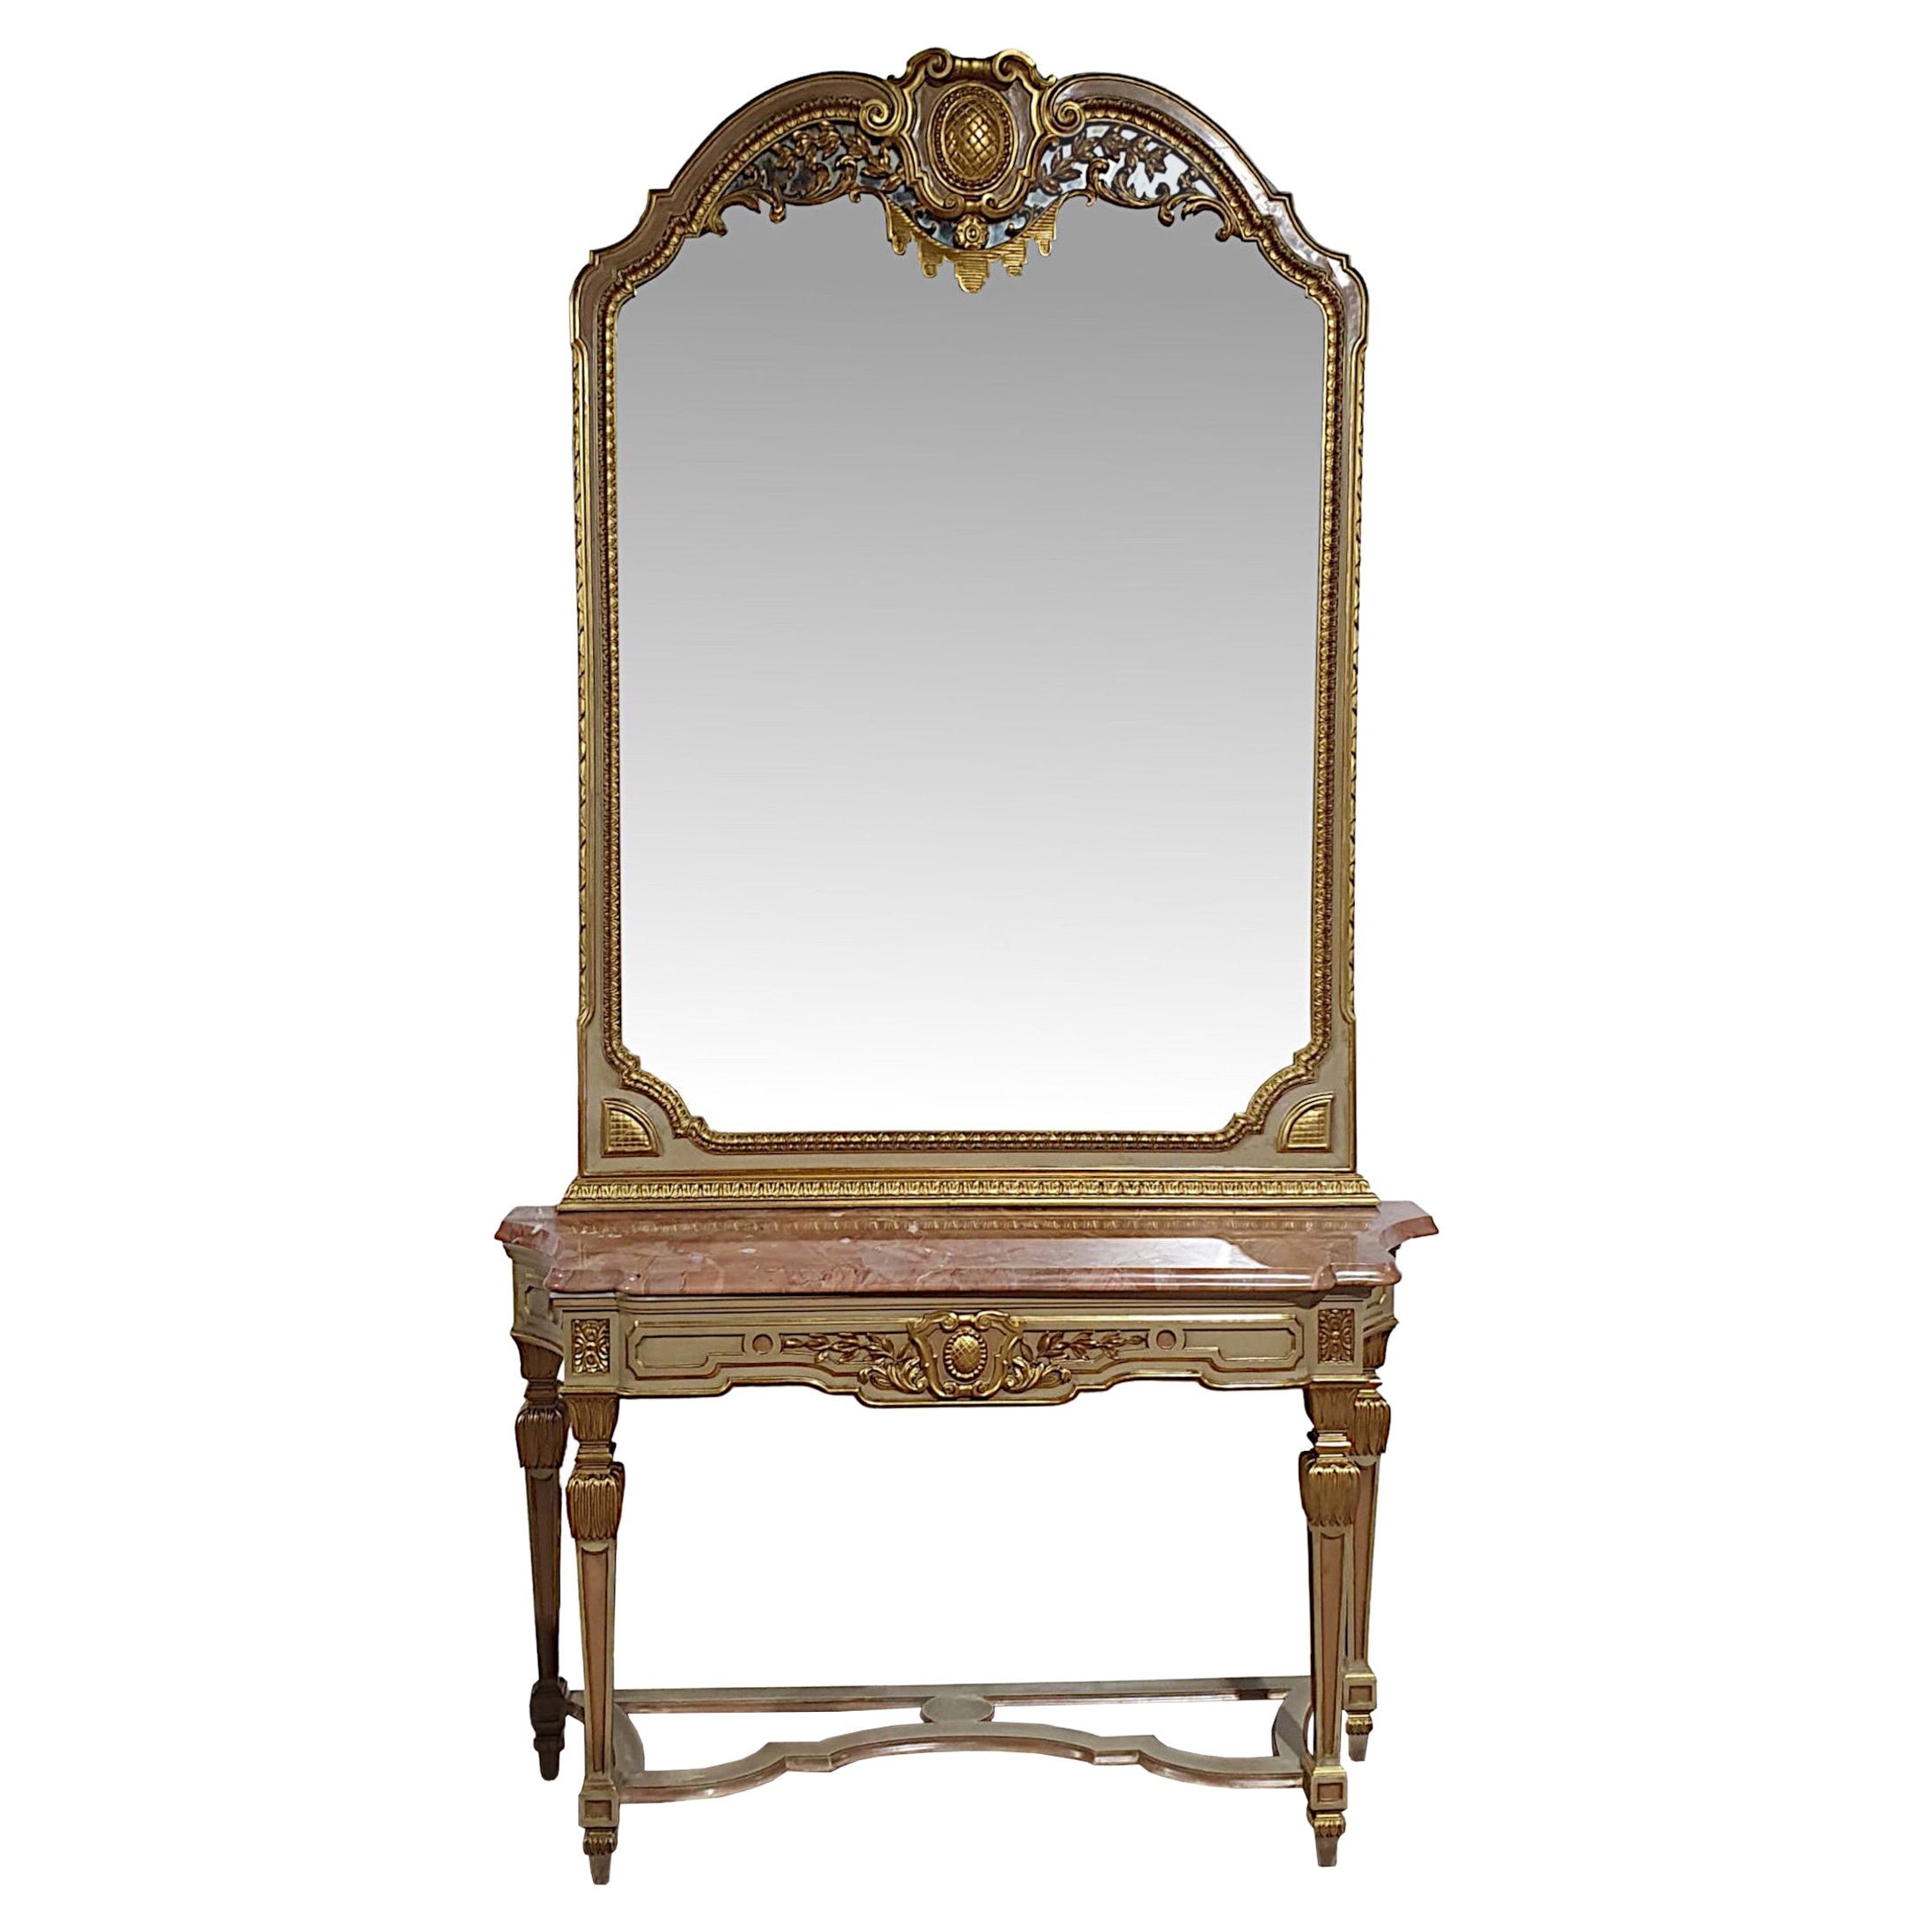 Very Fine Early 20th Century  Parcel Gilt Marble Top Console Table and Mirror